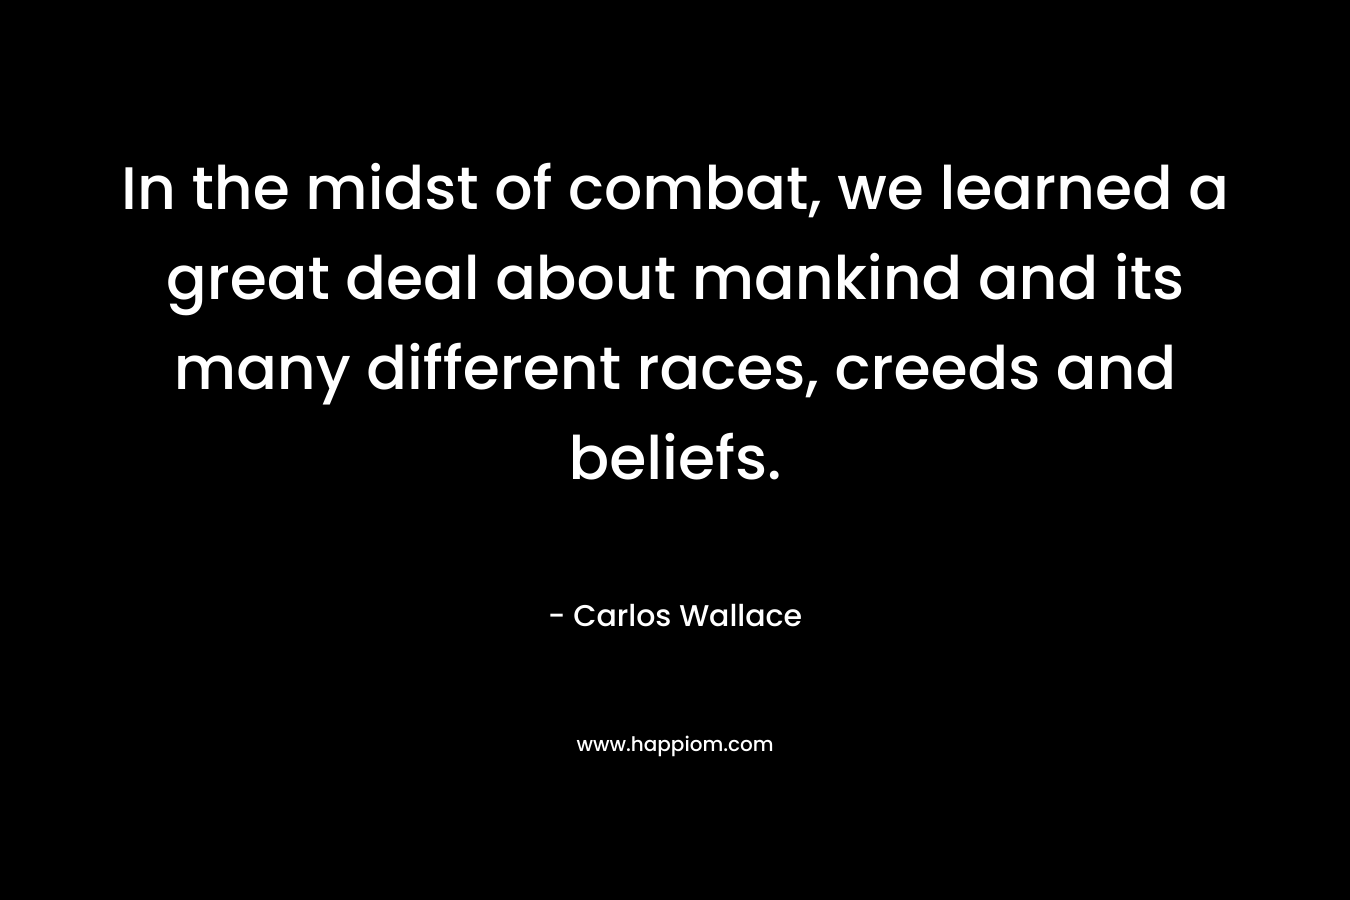 In the midst of combat, we learned a great deal about mankind and its many different races, creeds and beliefs. – Carlos Wallace